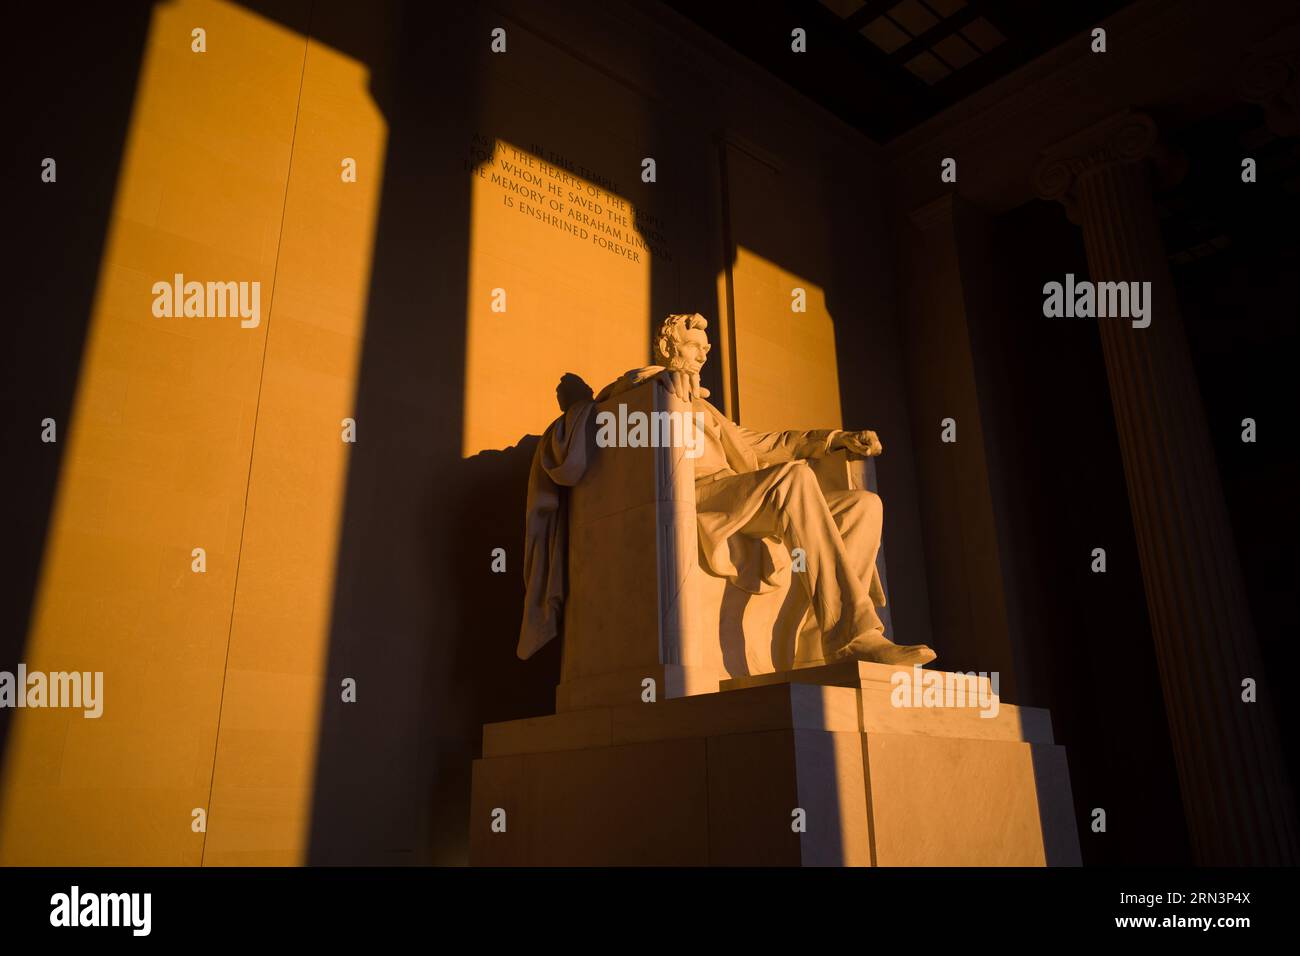 WASHINGTON DC, United States — The Lincoln Memorial statue, illuminated by the golden light of sunrise during the spring solstice, casts a warm glow over the historic monument. This specific solar event accentuates the features of the iconic tribute to America's 16th president, emphasizing Abraham Lincoln's role in the nation's history. Stock Photo